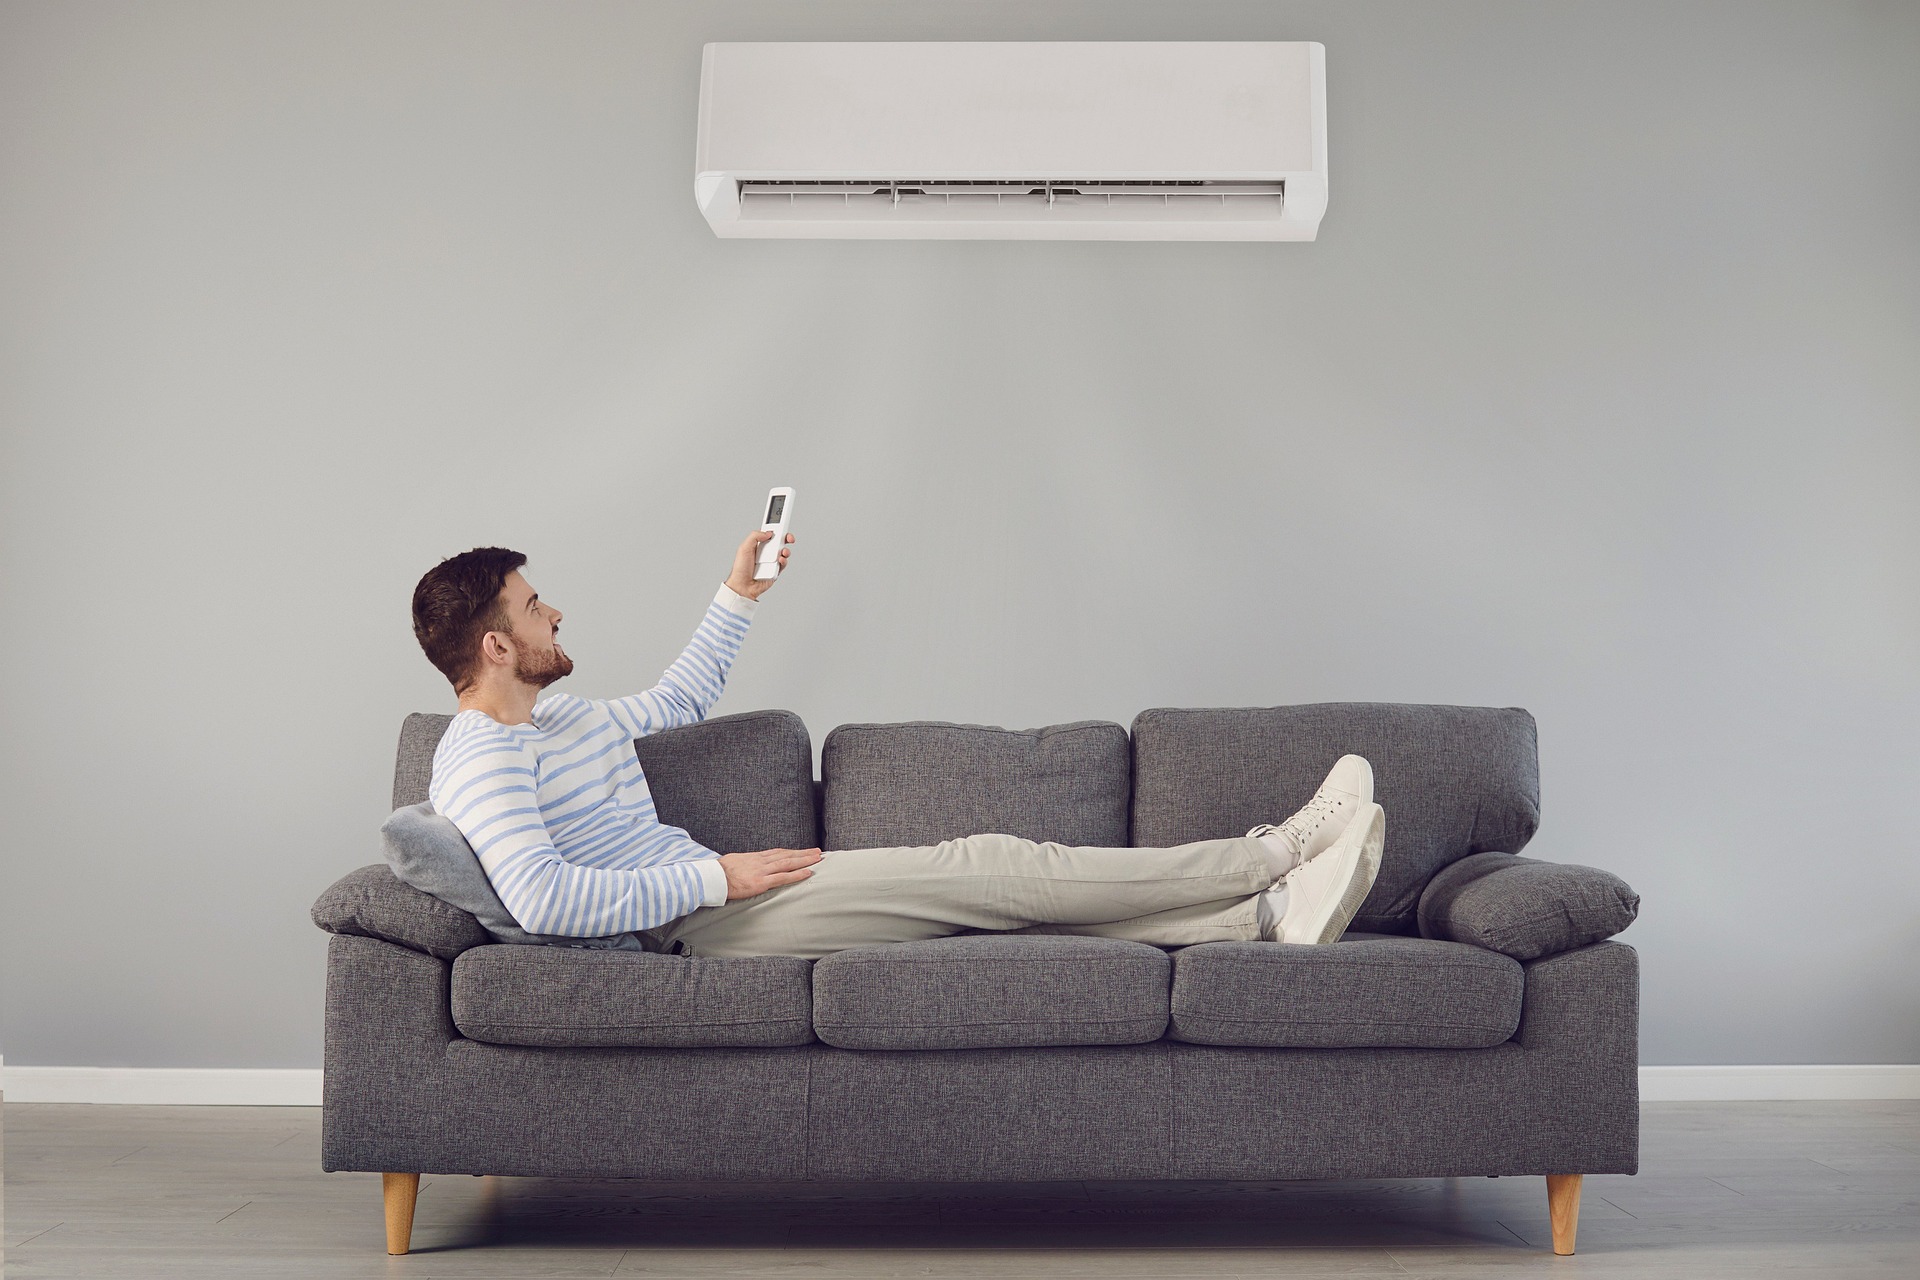 Man sits on a couch controlling the air conditioner in his home.